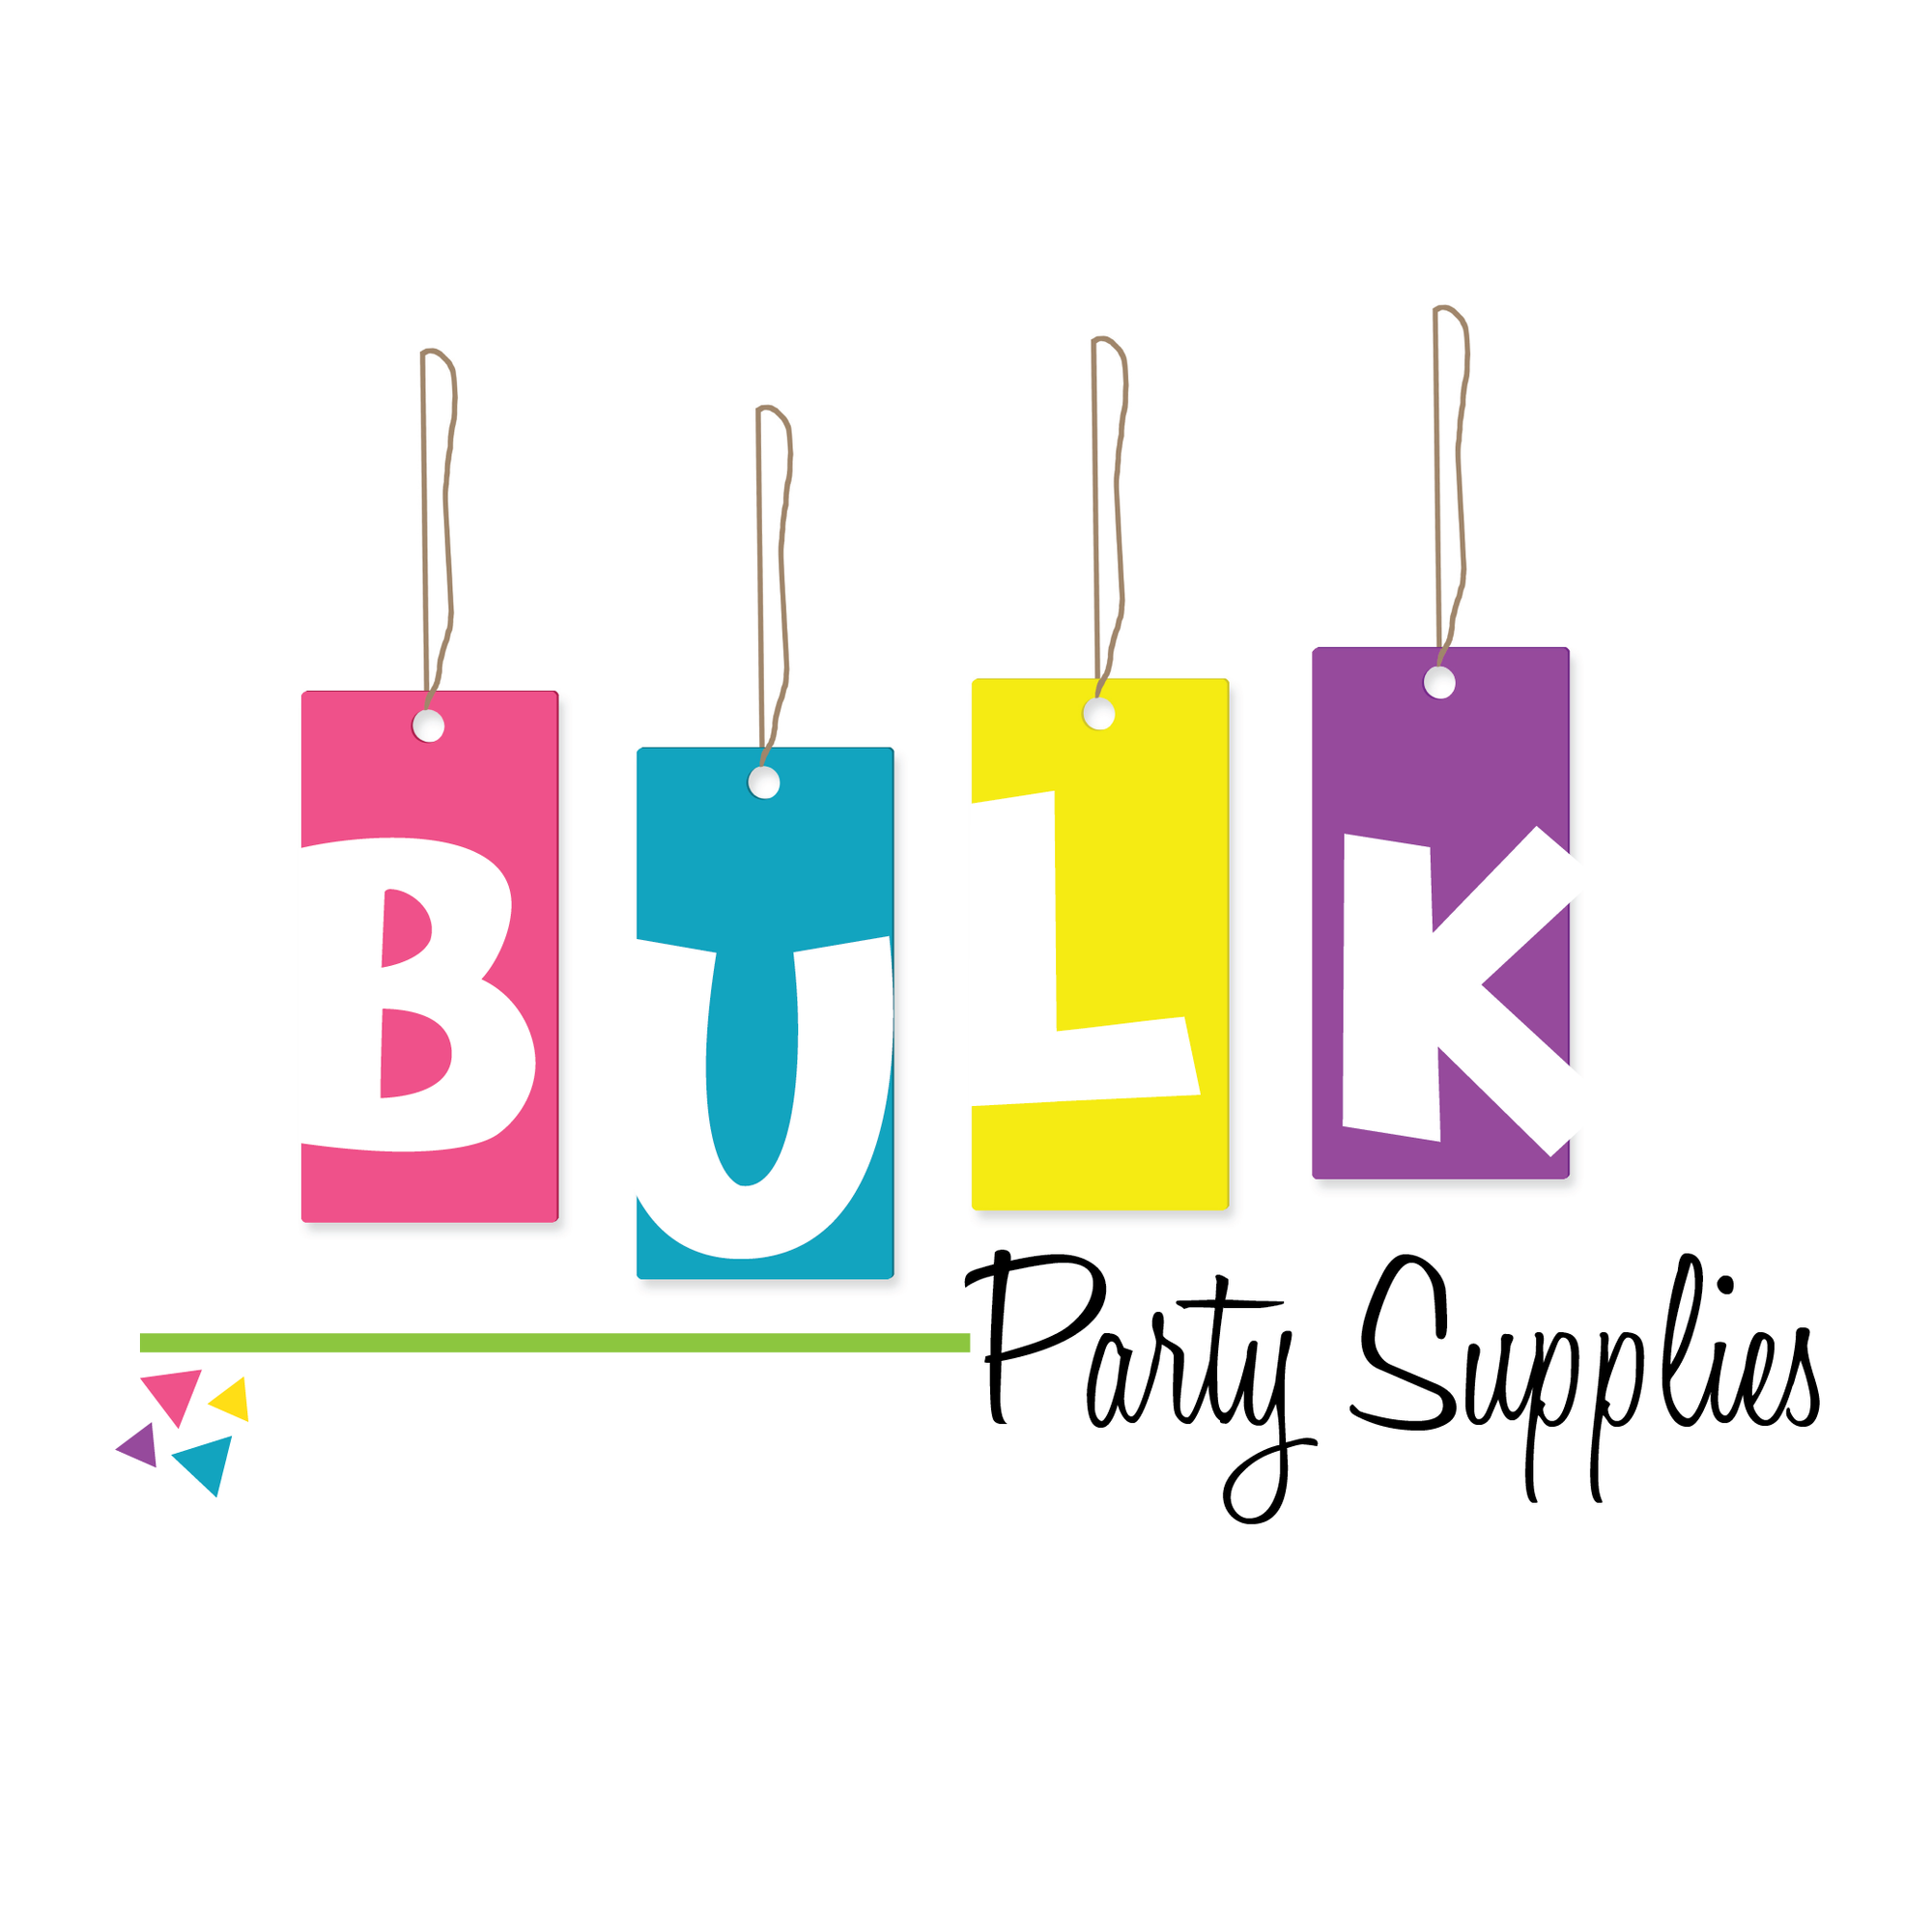 Why Buy Party Supplies in Bulk?